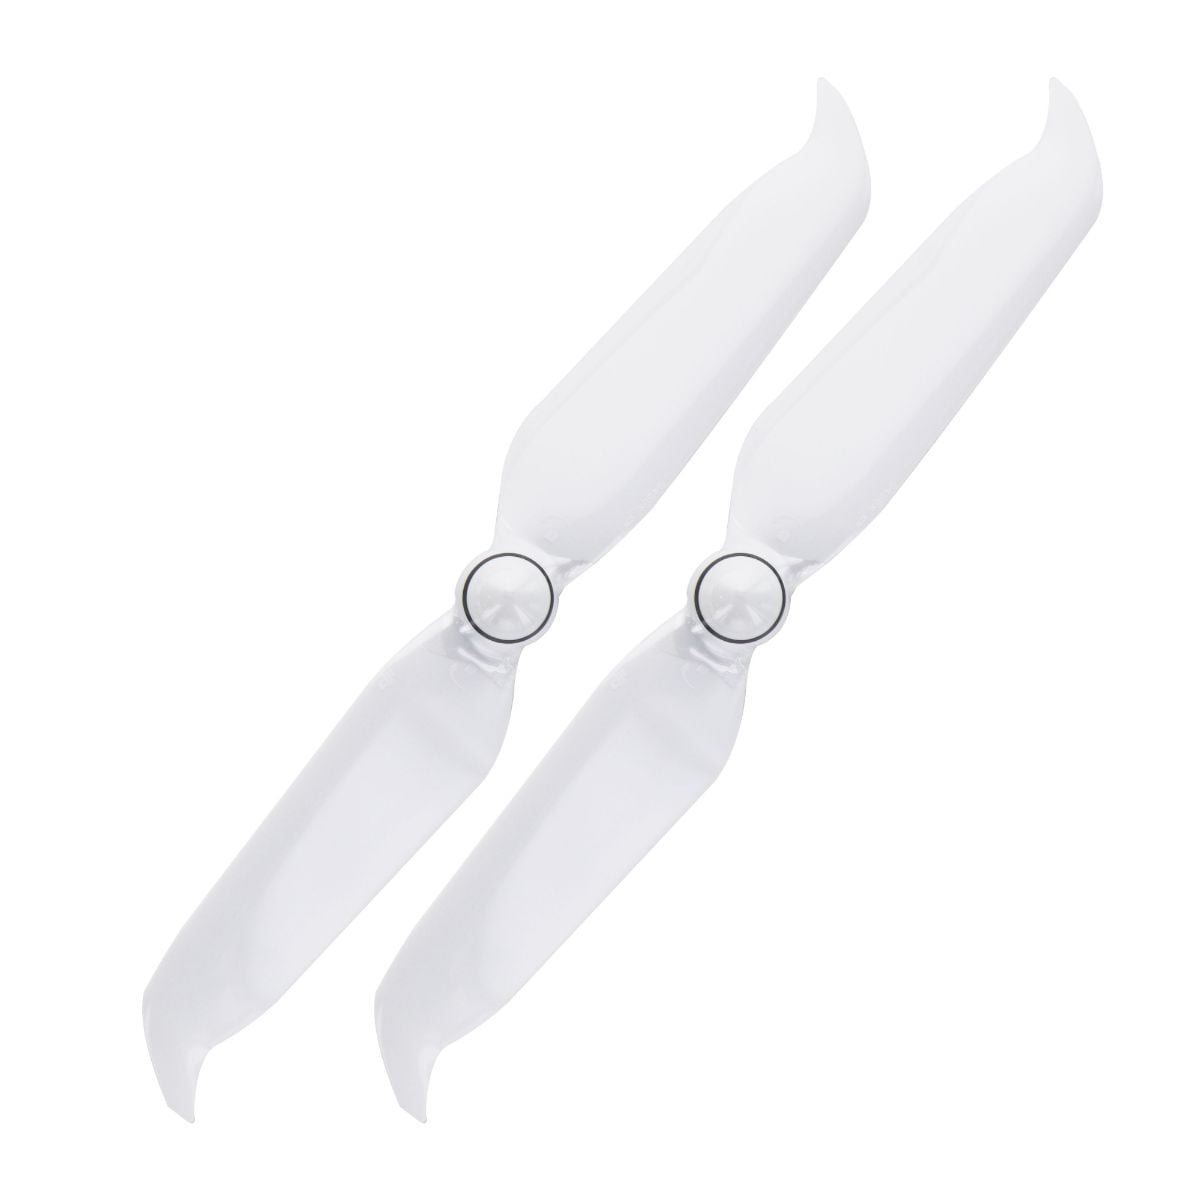 4x 9455S Propellers for DJI Phantom 4PRO V2.0 Props CCW CW Drone Parts White 